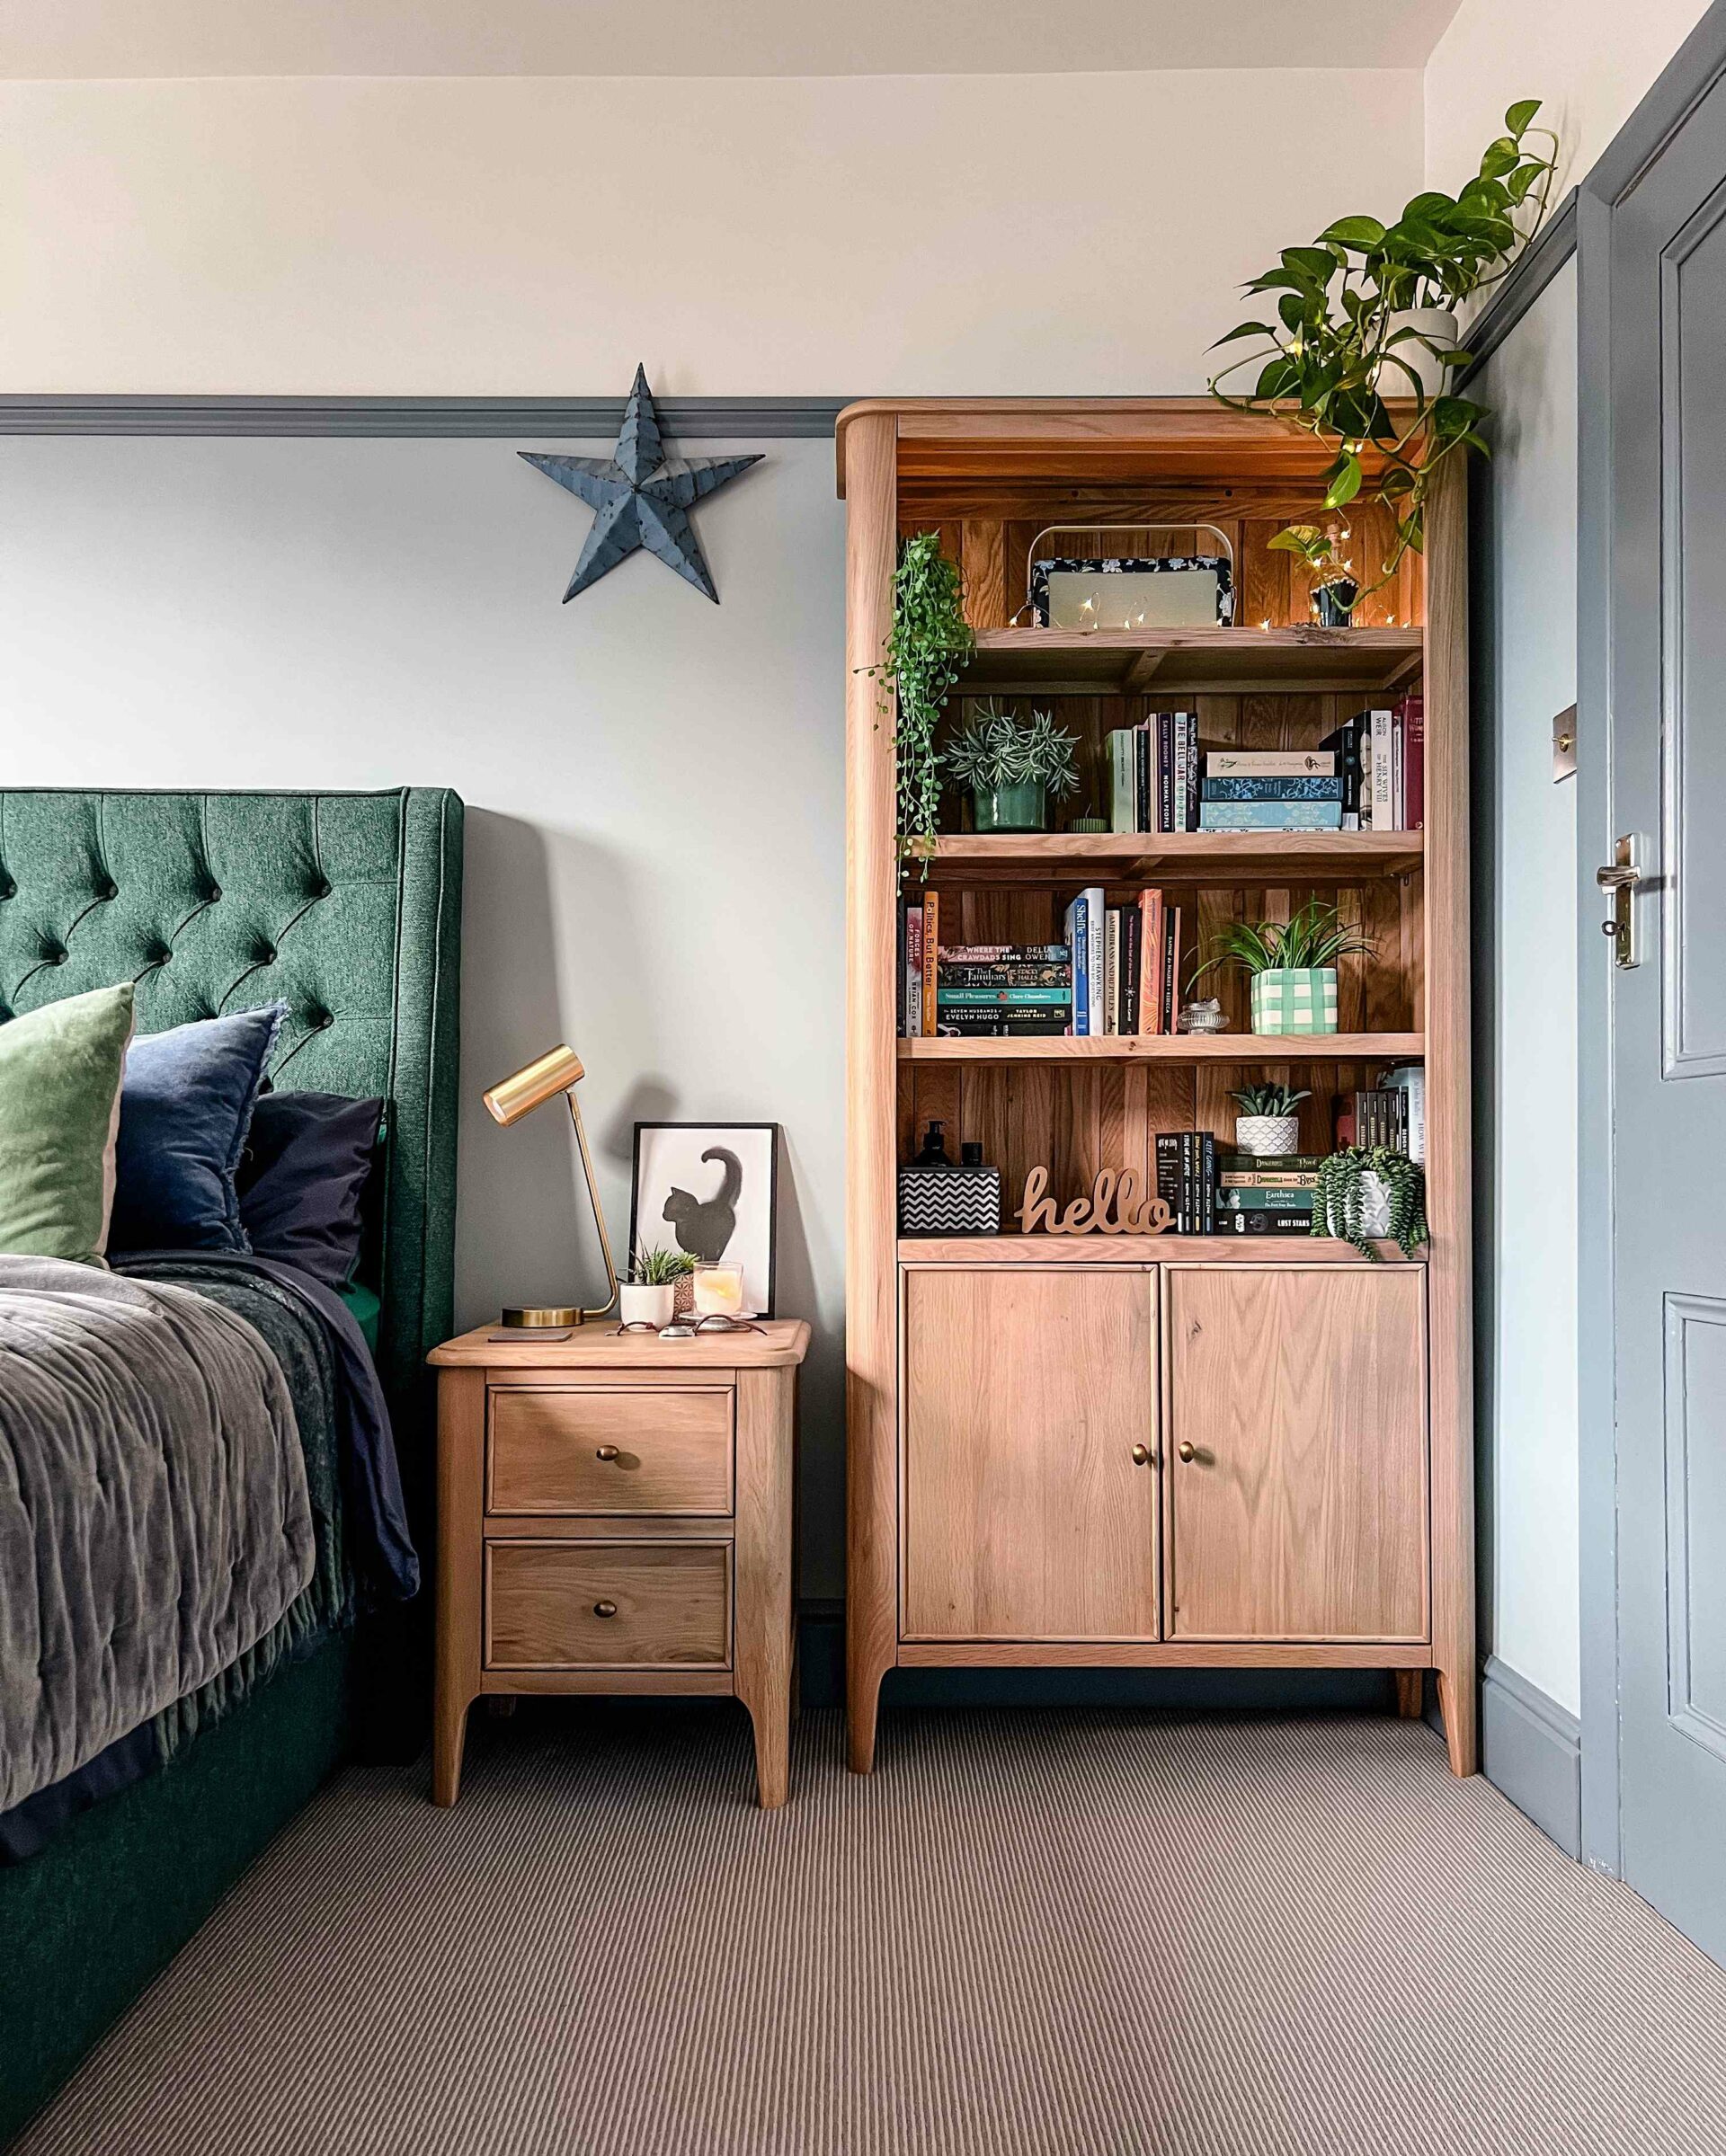 A bed, a bookcase and bedside table-bedroom furniture-upholstered double bed-wooden bedside table with drawers-wooden bookcase-green upholstered bed-grey wall colour